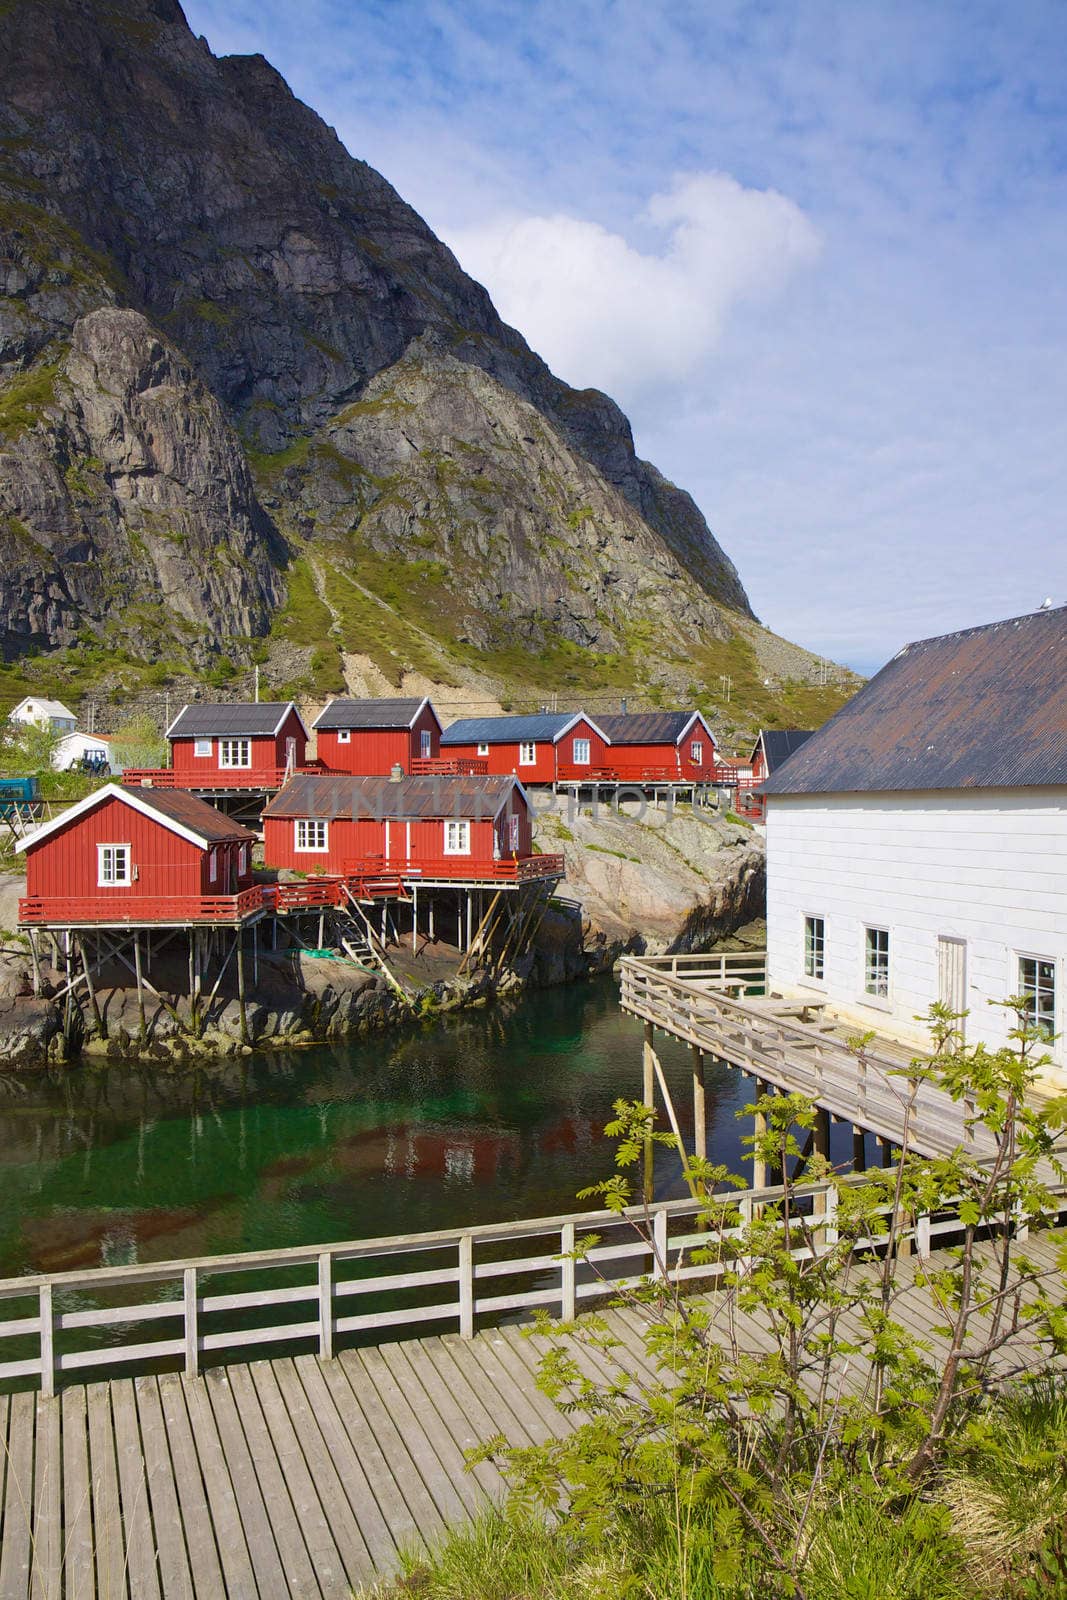 Fishing huts in Norway by Harvepino